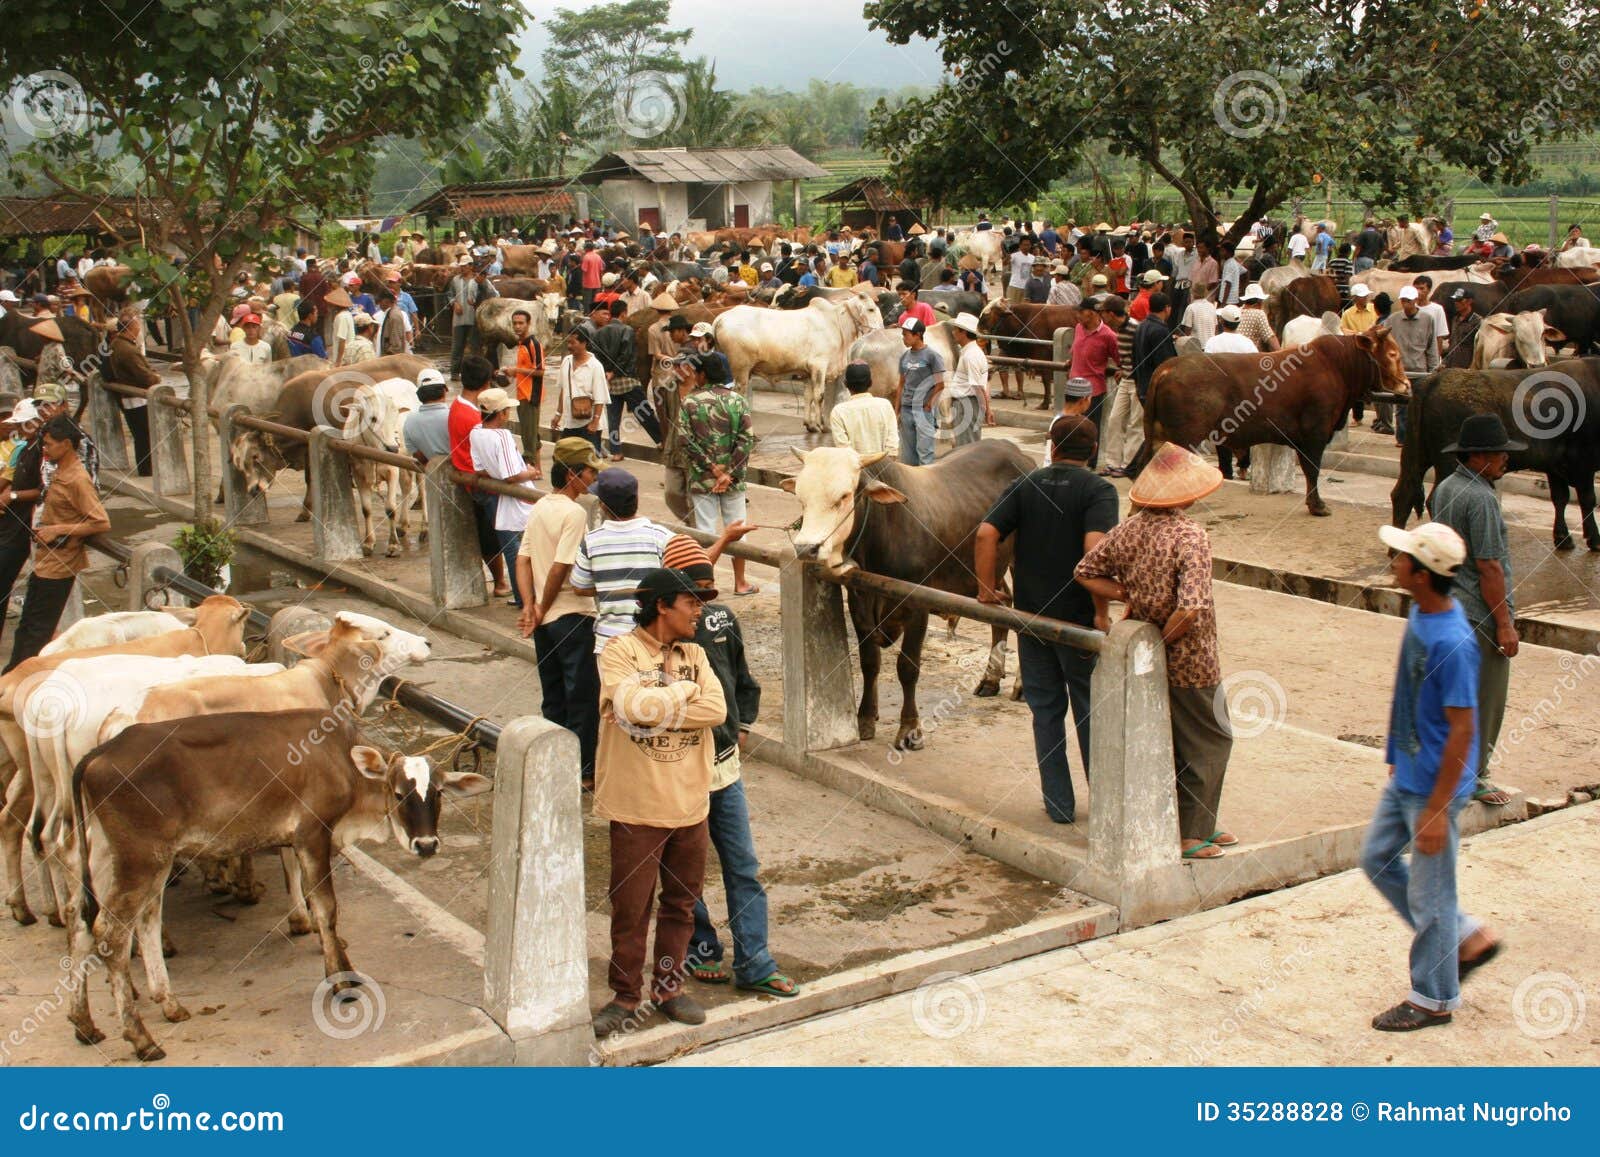 Download this Atmosphere The Cattle Market Asia Indonesia picture